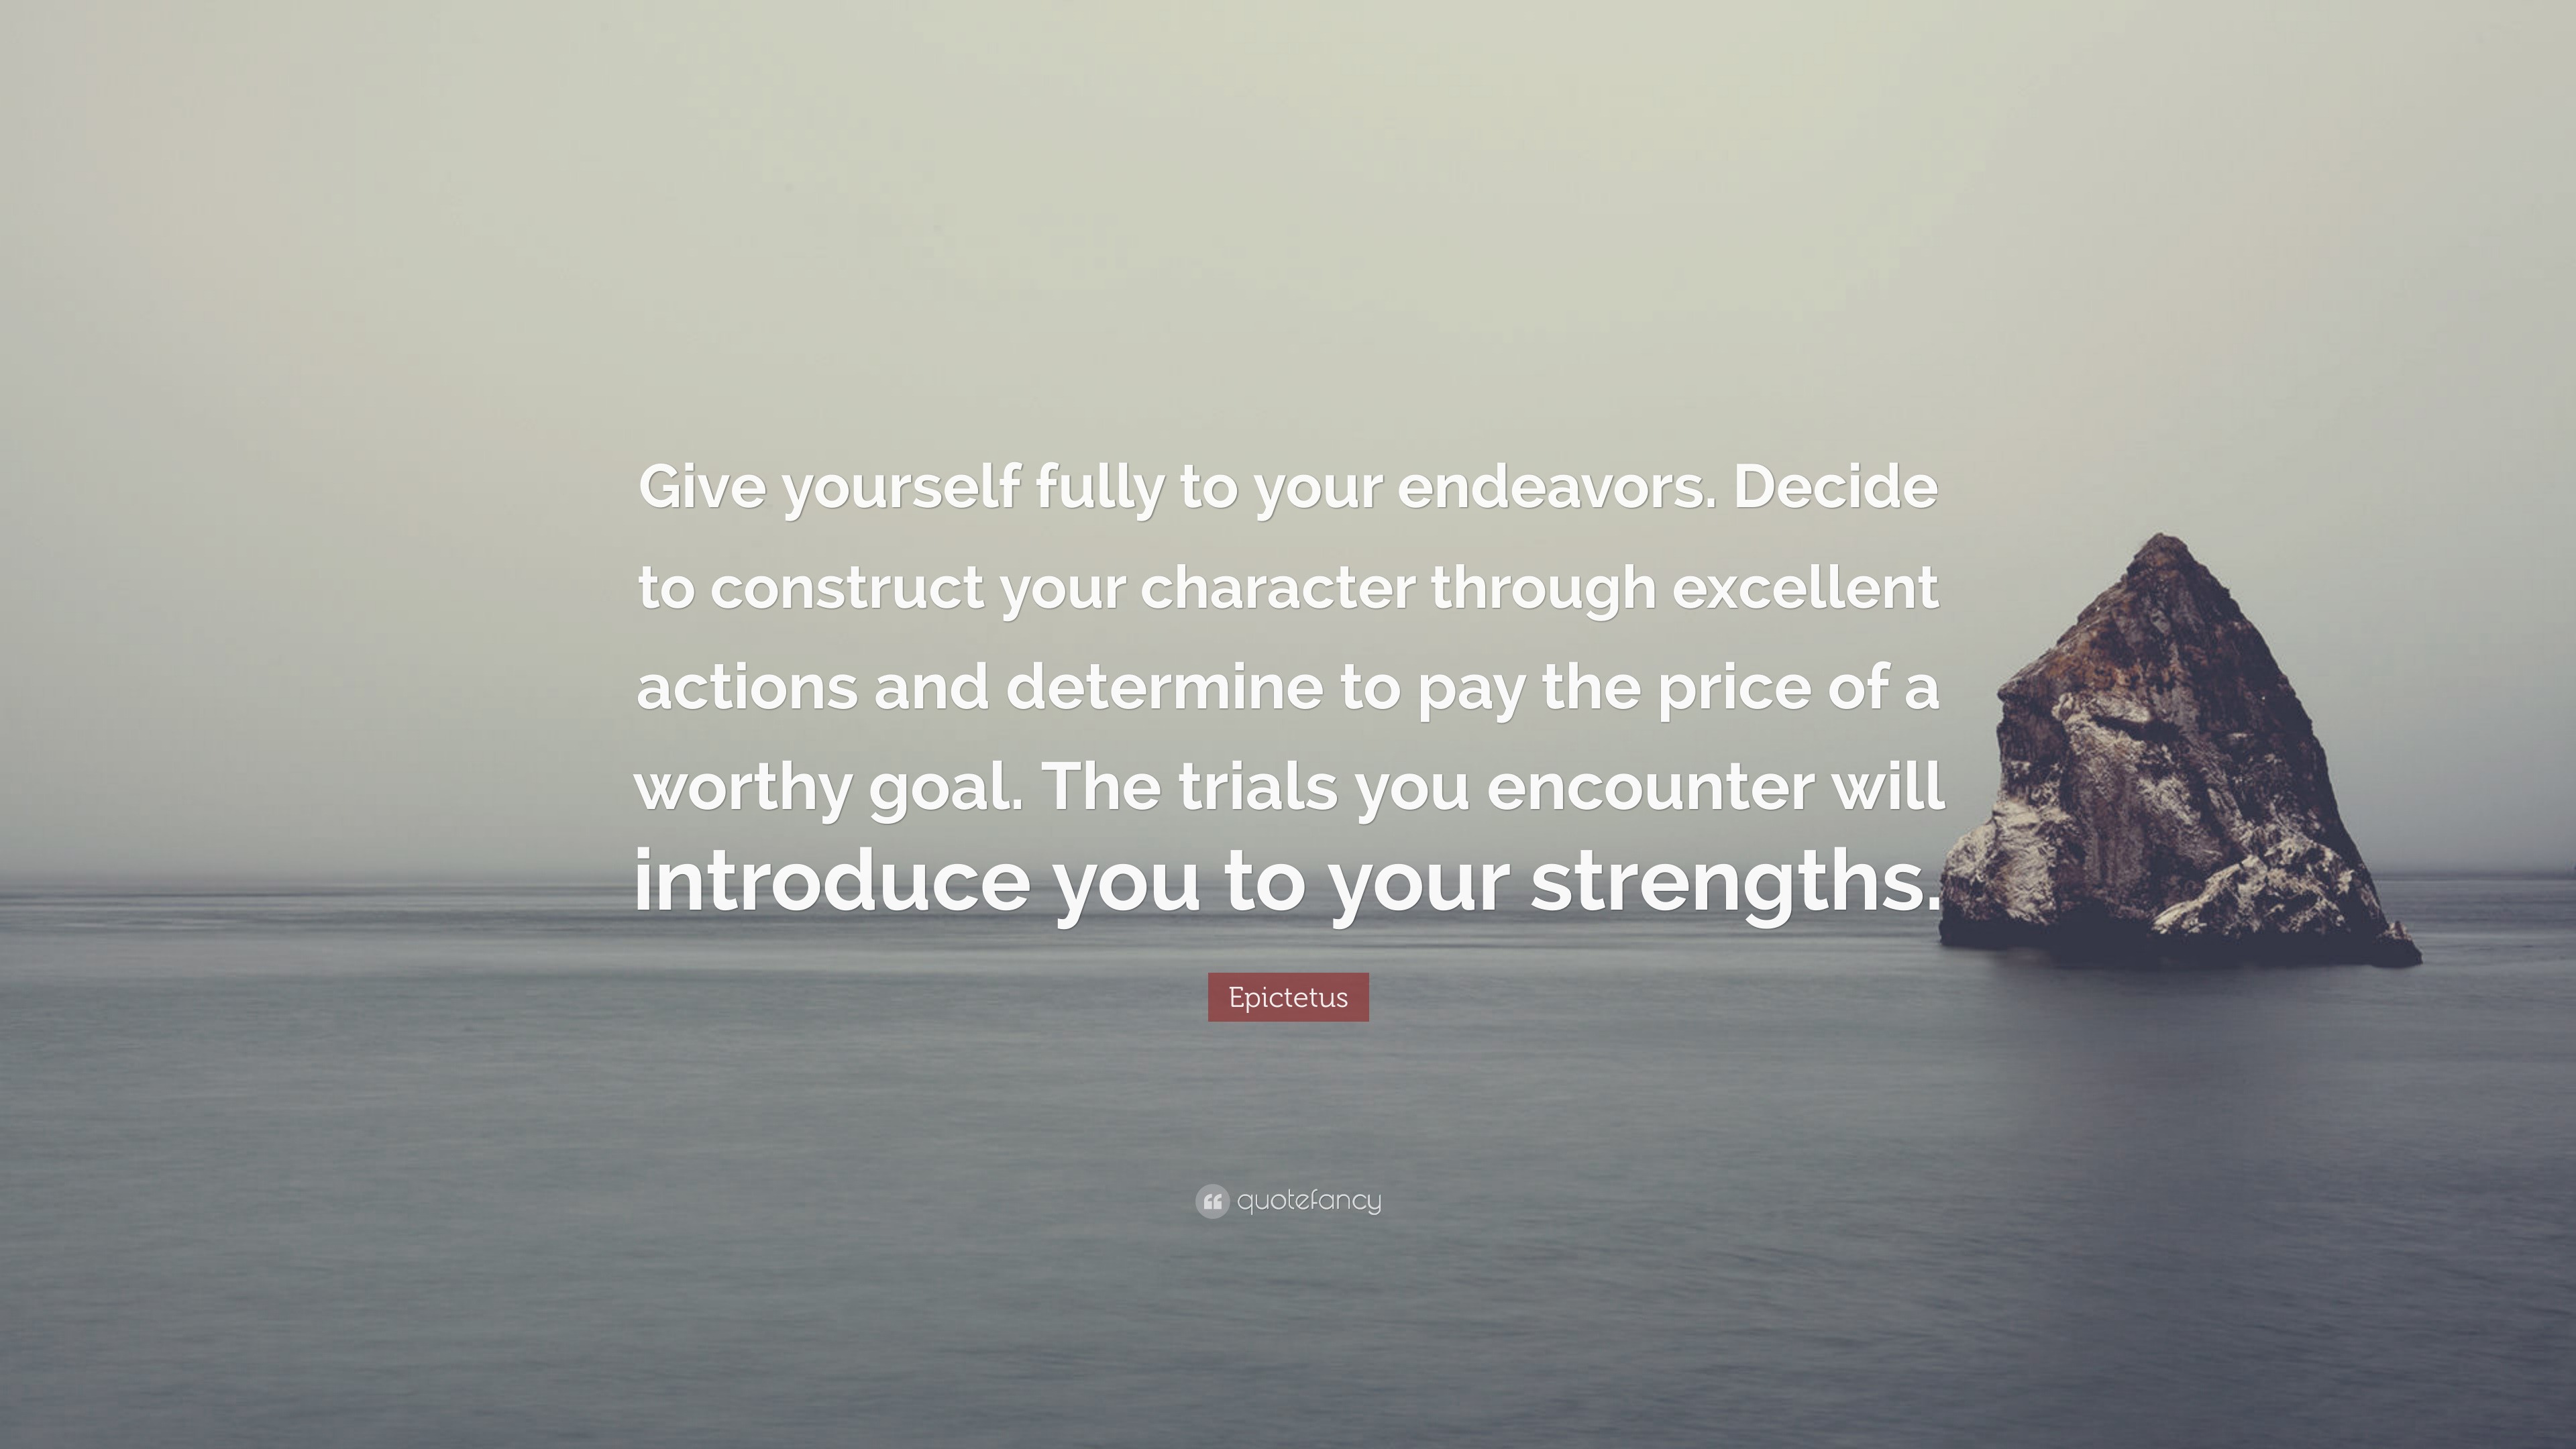 4979958-Epictetus-Quote-Give-yourself-fully-to-your-endeavors-Decide-to.jpg